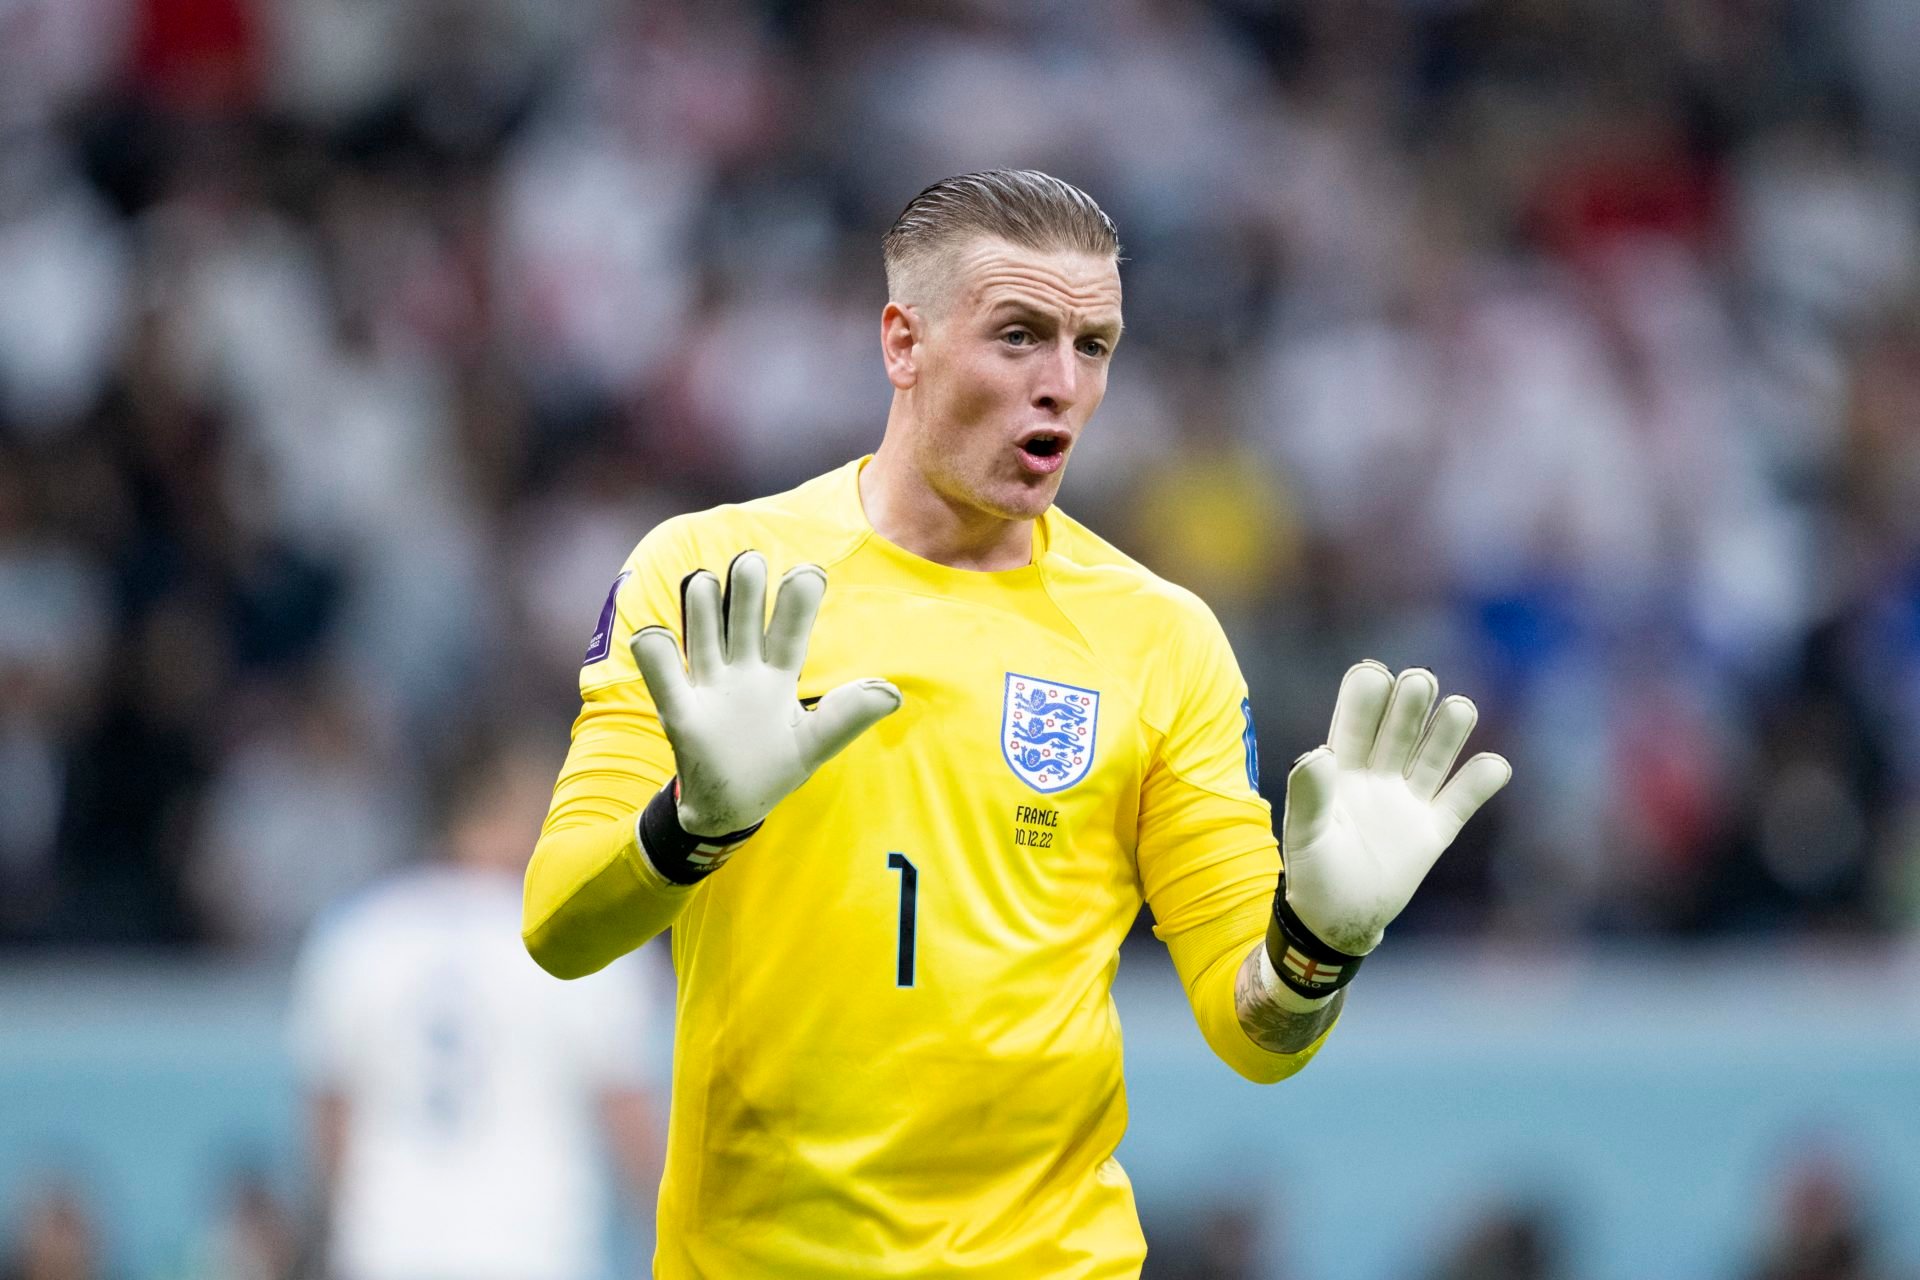 Pickford could be tempted to leave Everton